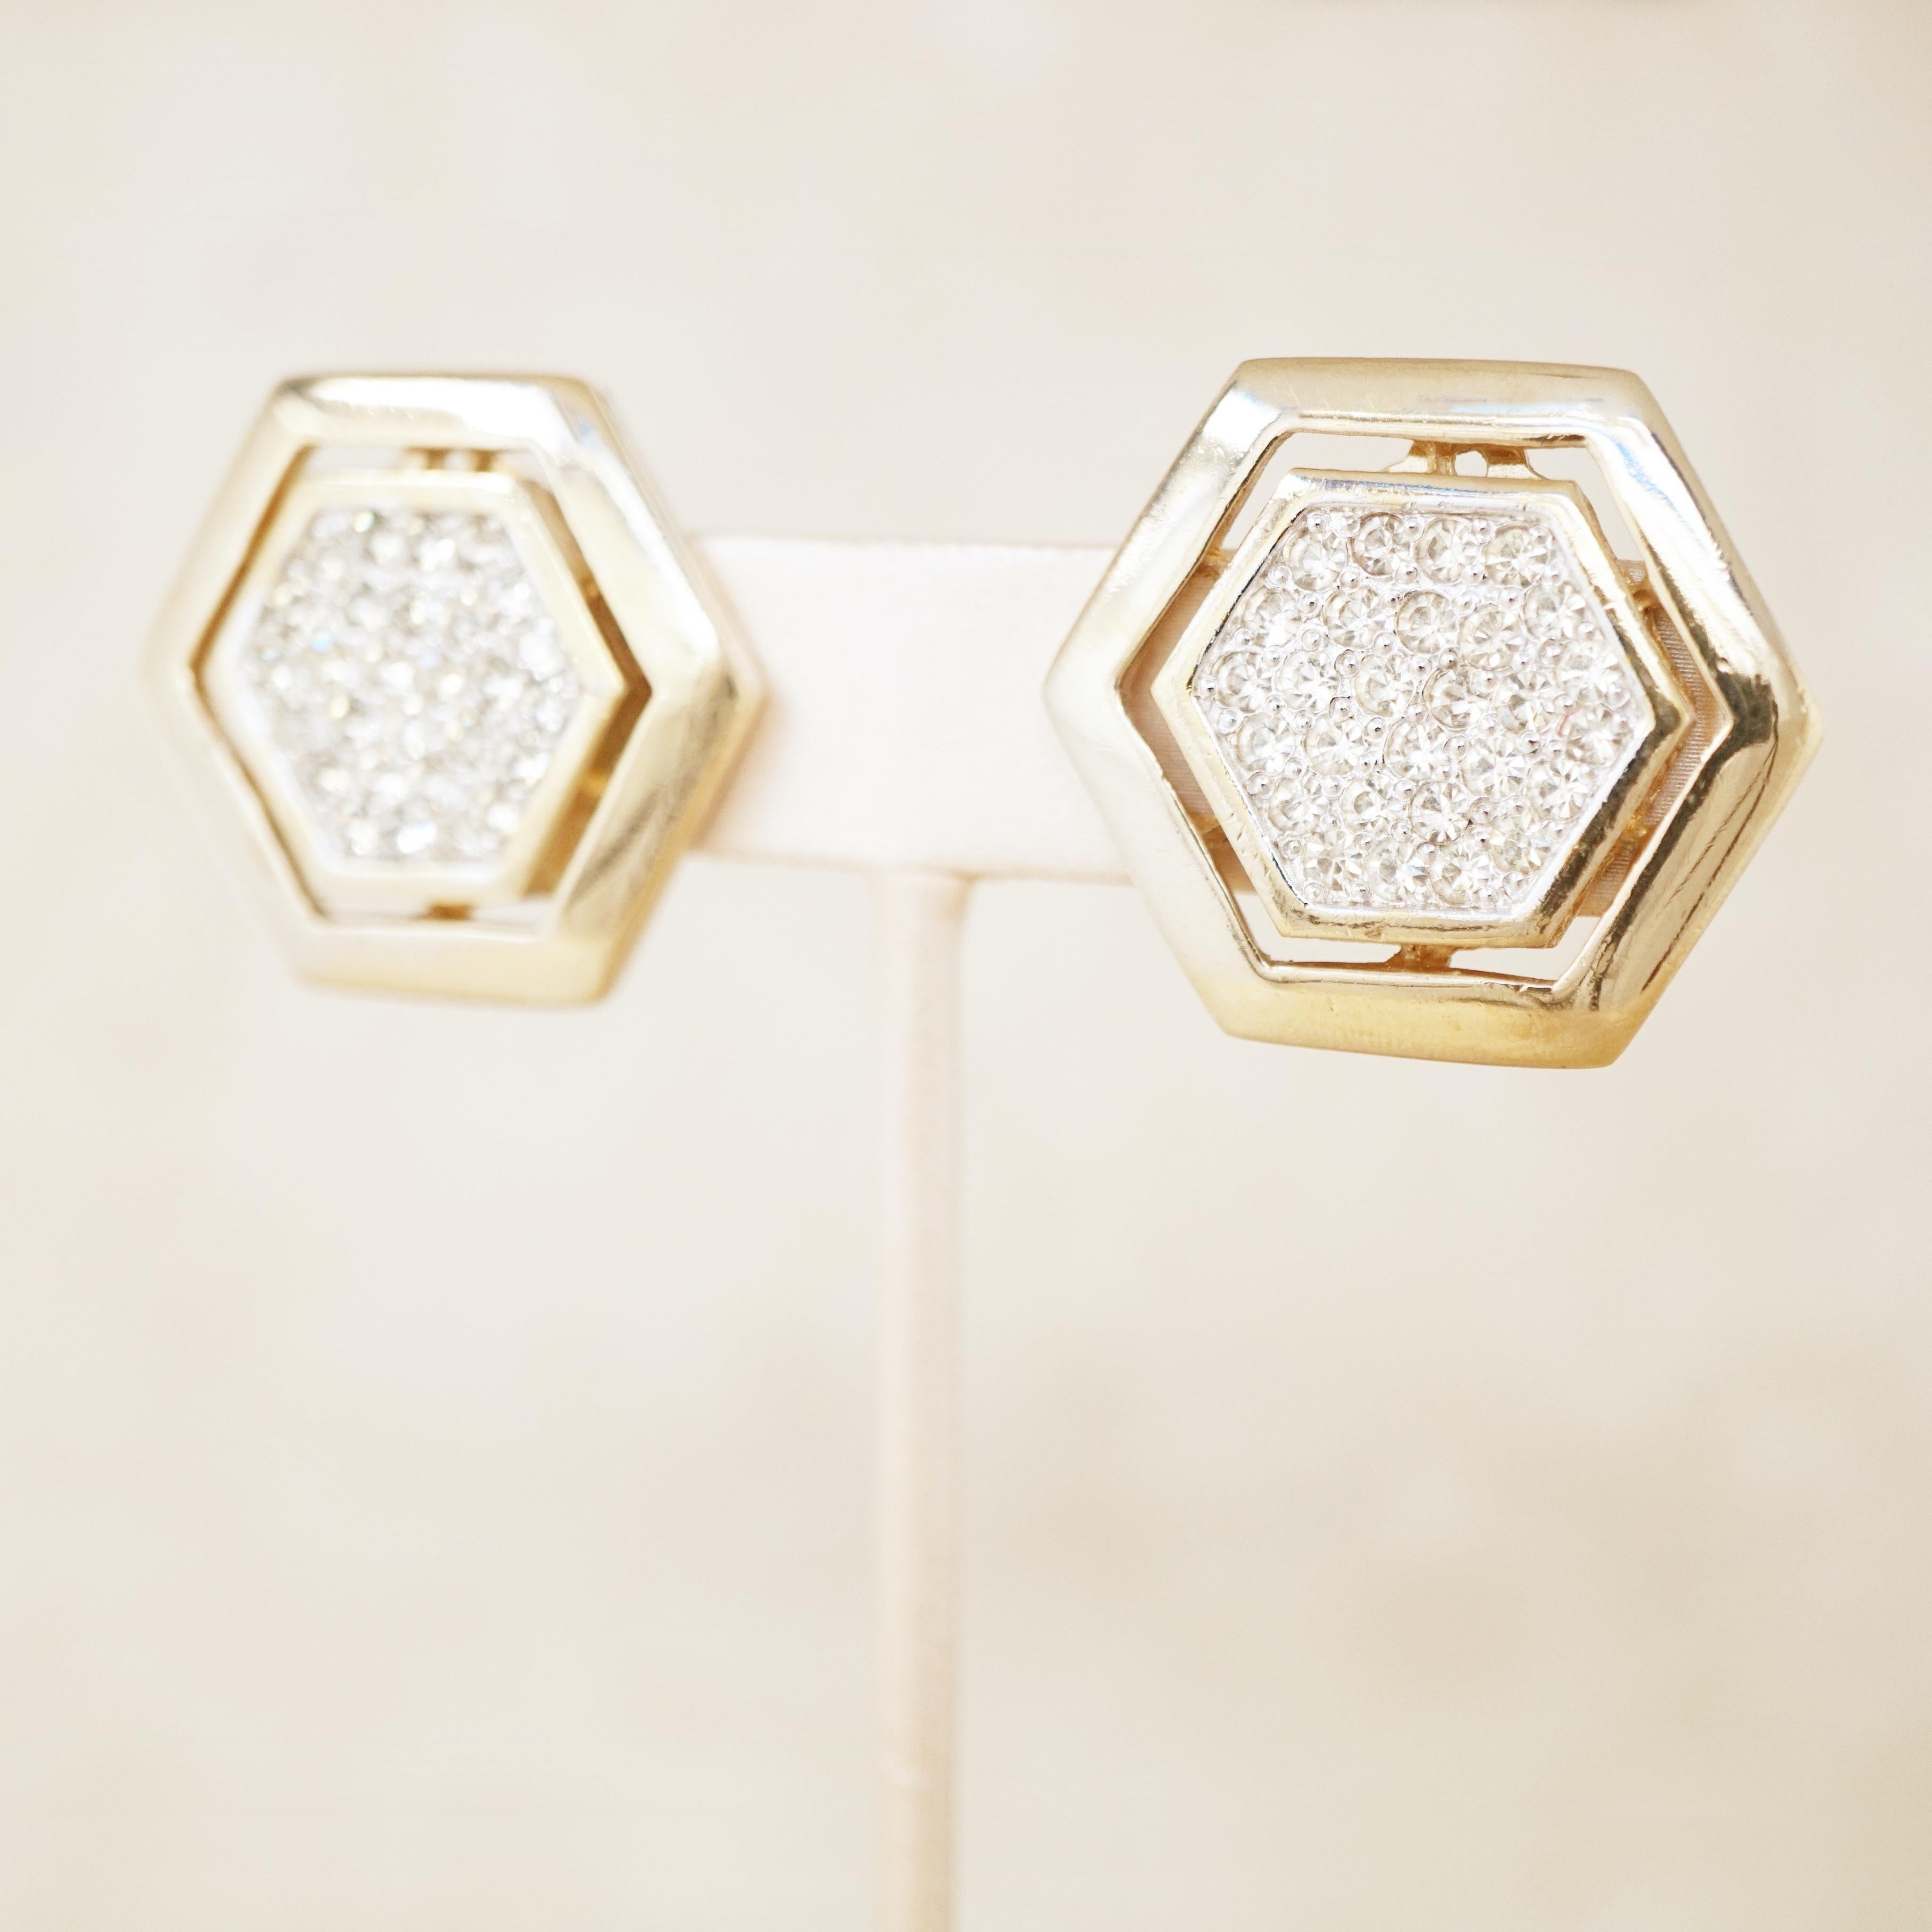 Vintage Gilded Hexagon Statement Earrings with Crystal Pavé by Panetta, 1980s In Excellent Condition For Sale In McKinney, TX